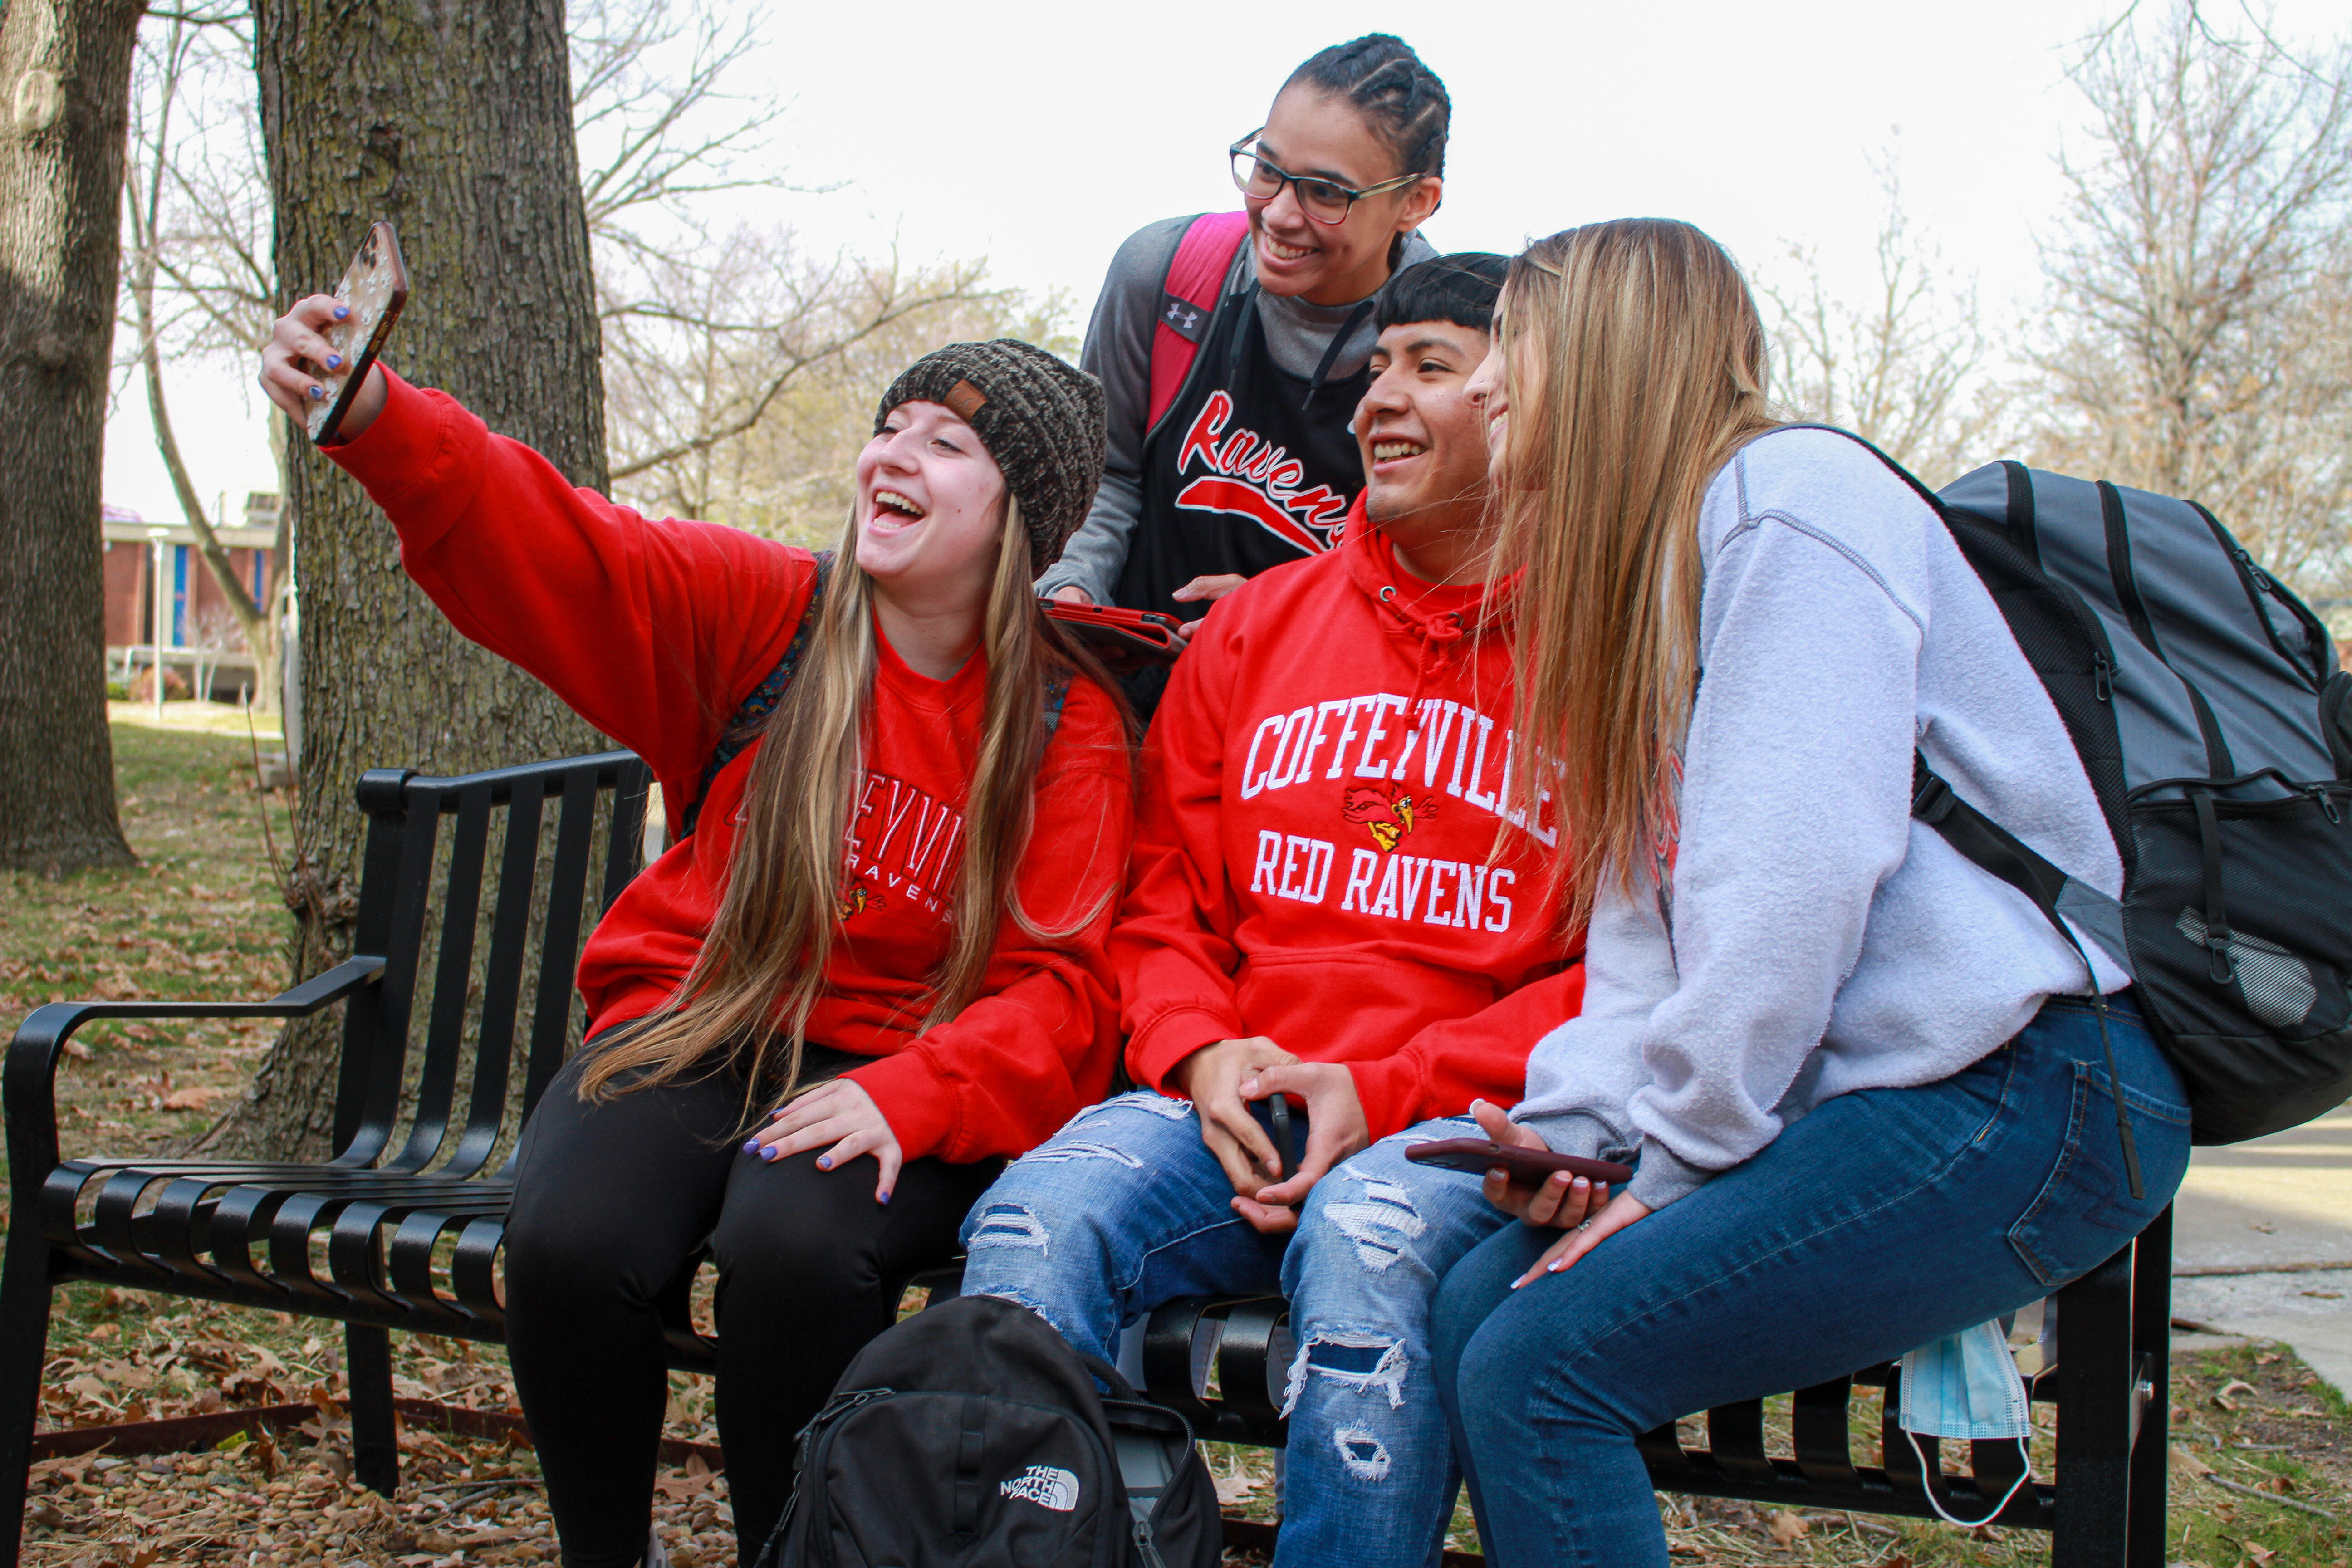 Four students sitting on a bench in the square taking a selfie